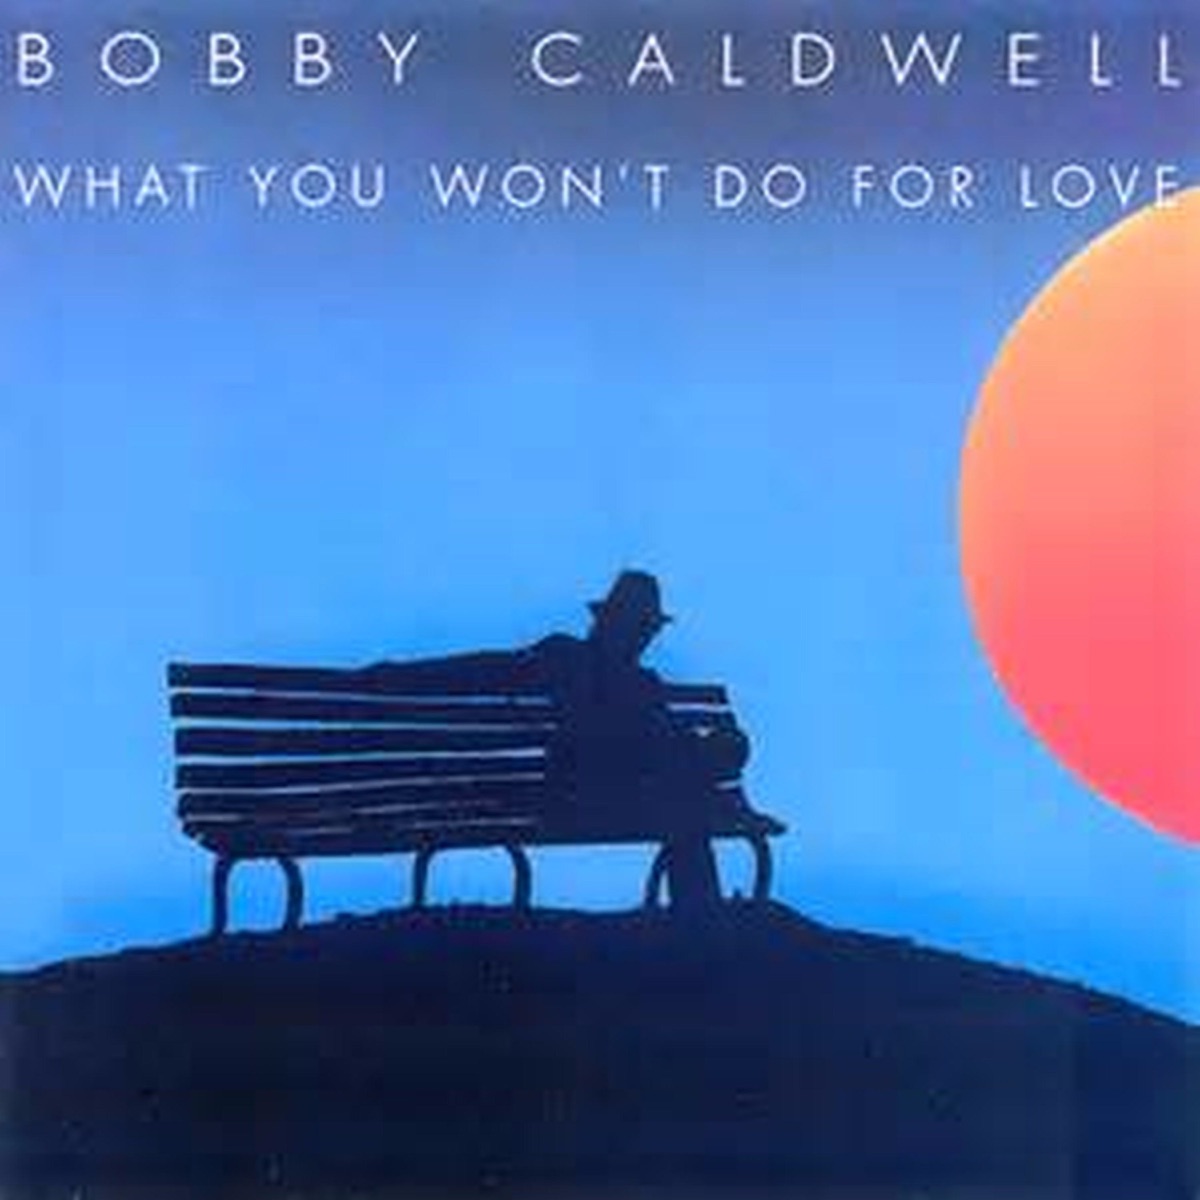 Cat In the Hat by Bobby Caldwell on Apple Music